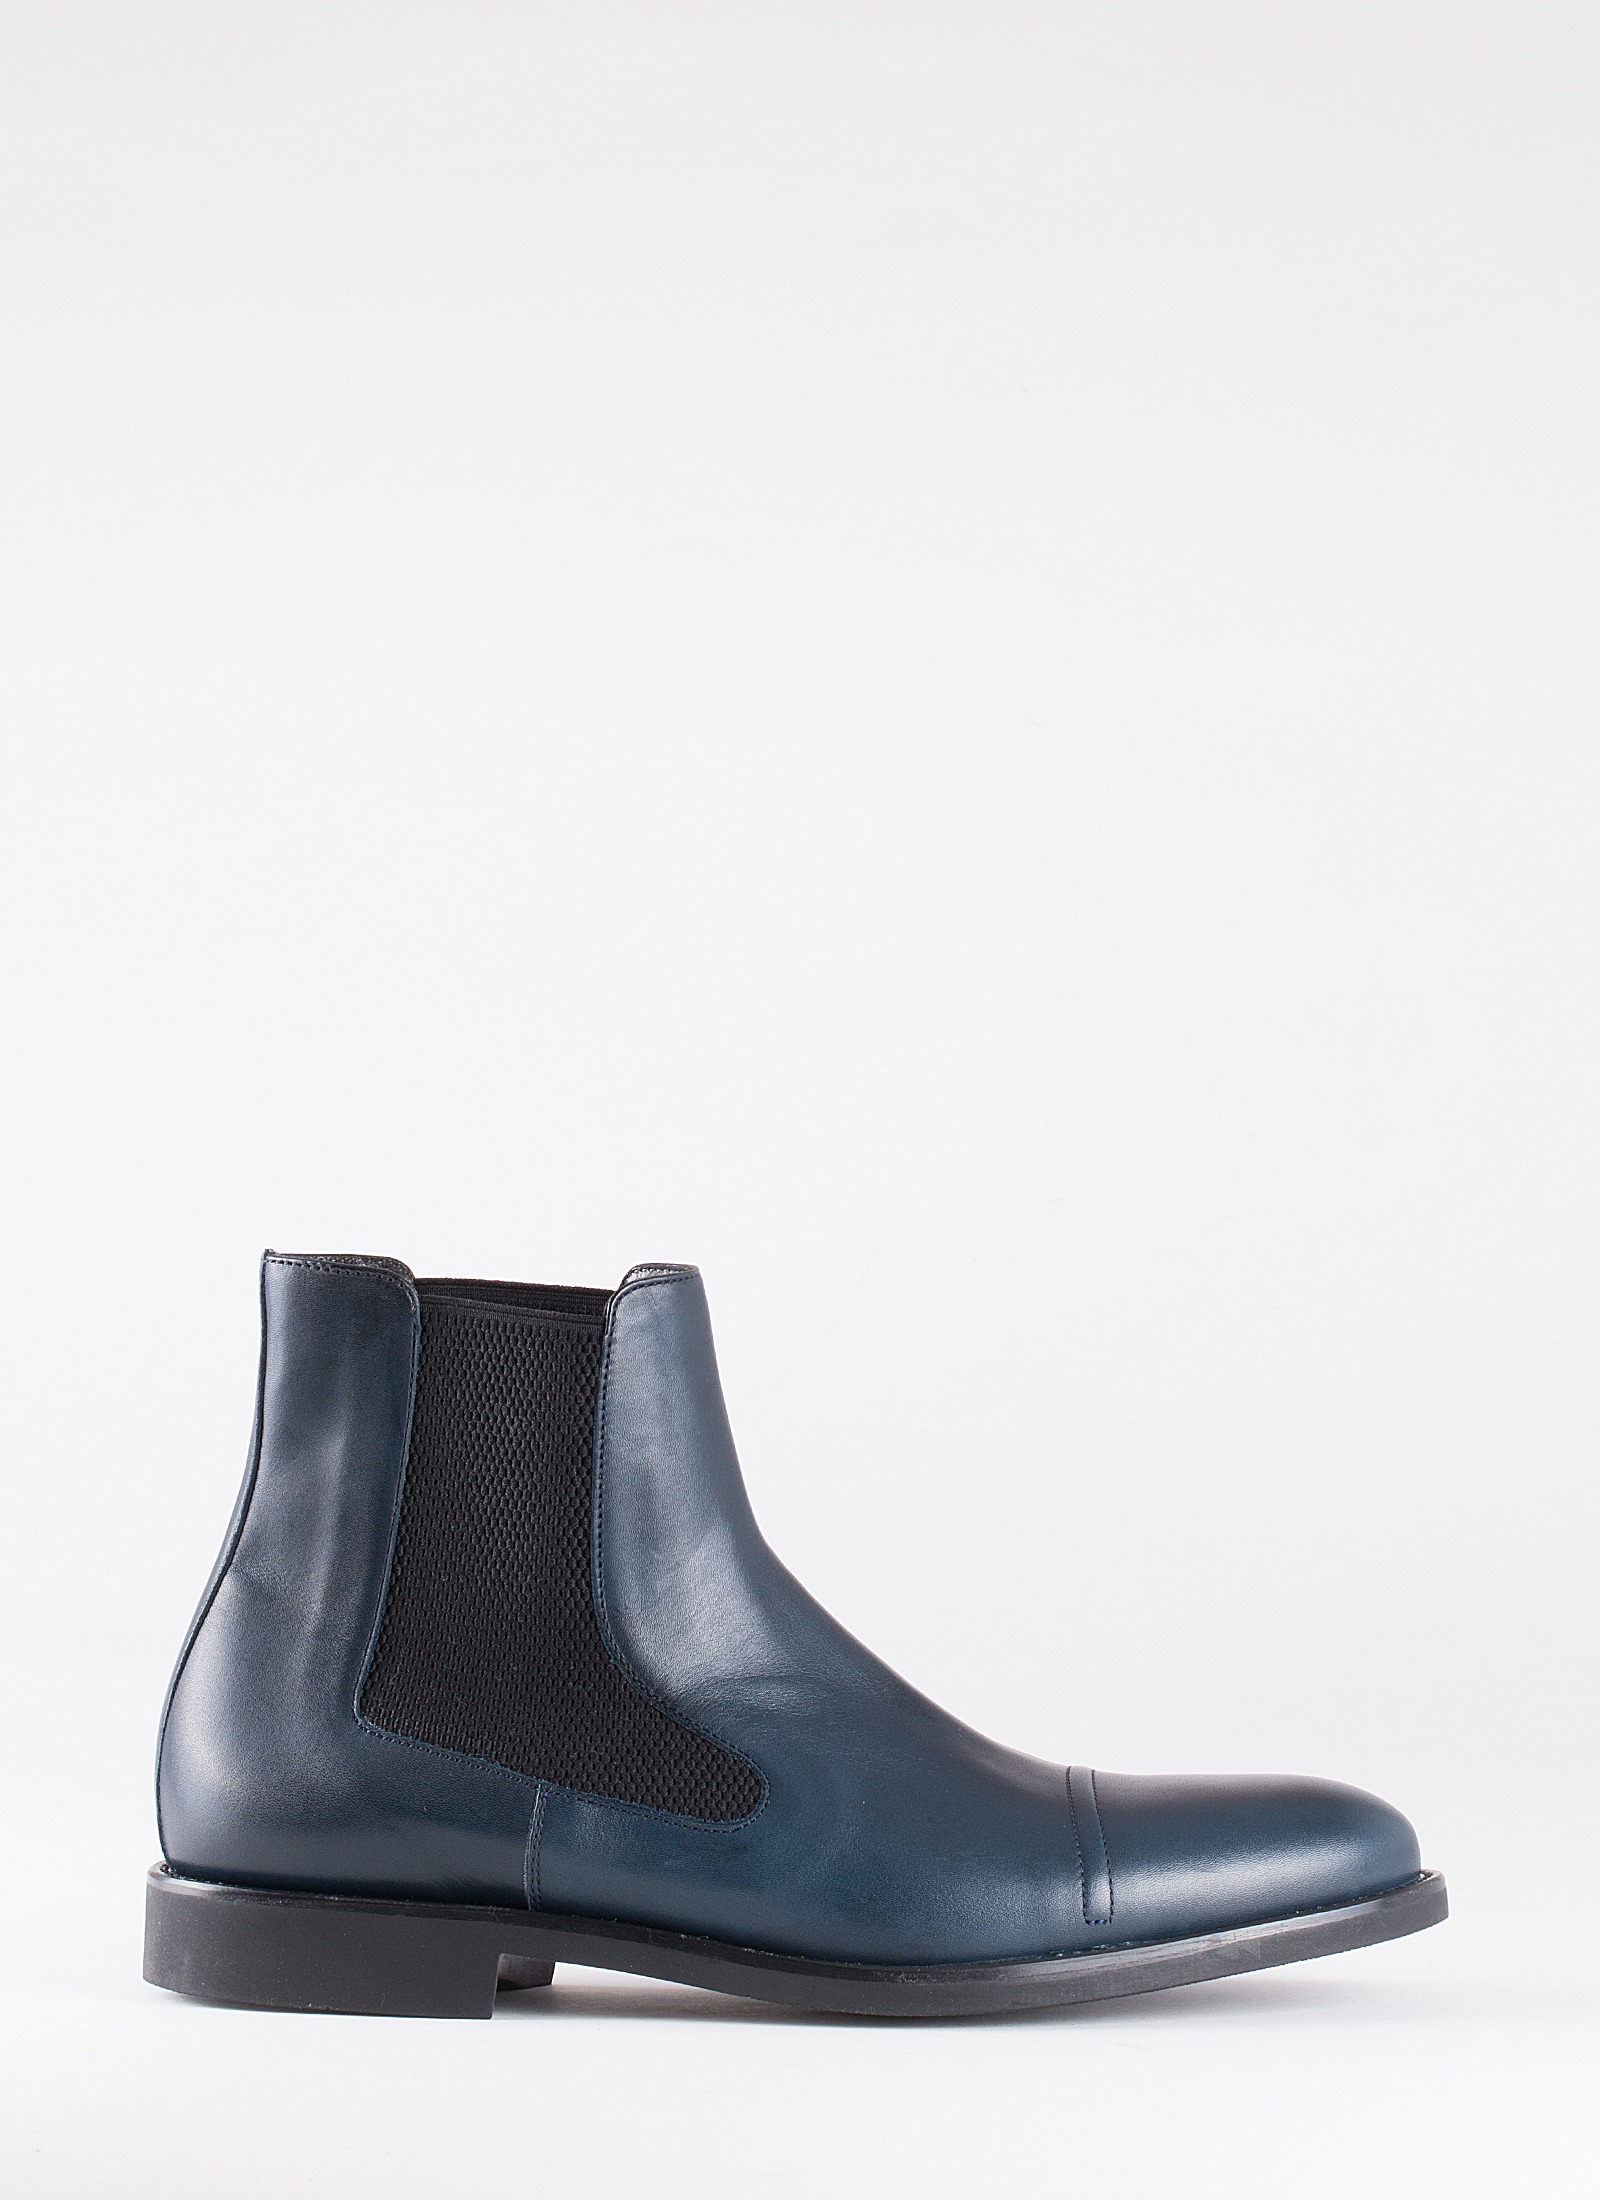 LEATHER CHELSEA BOOTS - MORESCHI